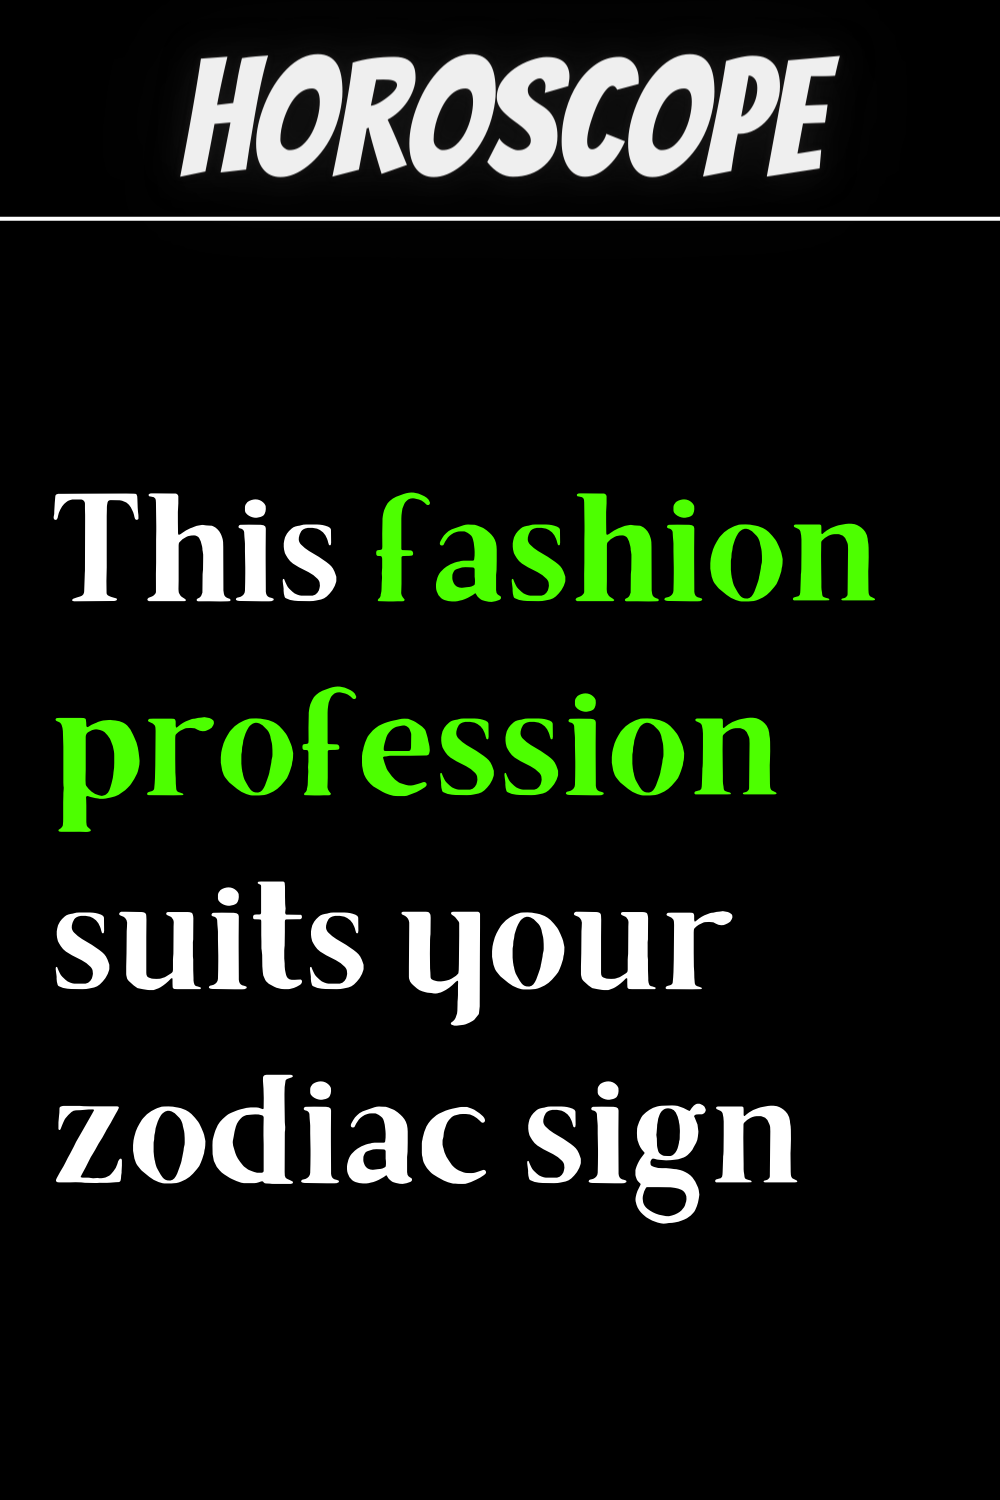 This fashion profession suits your zodiac sign